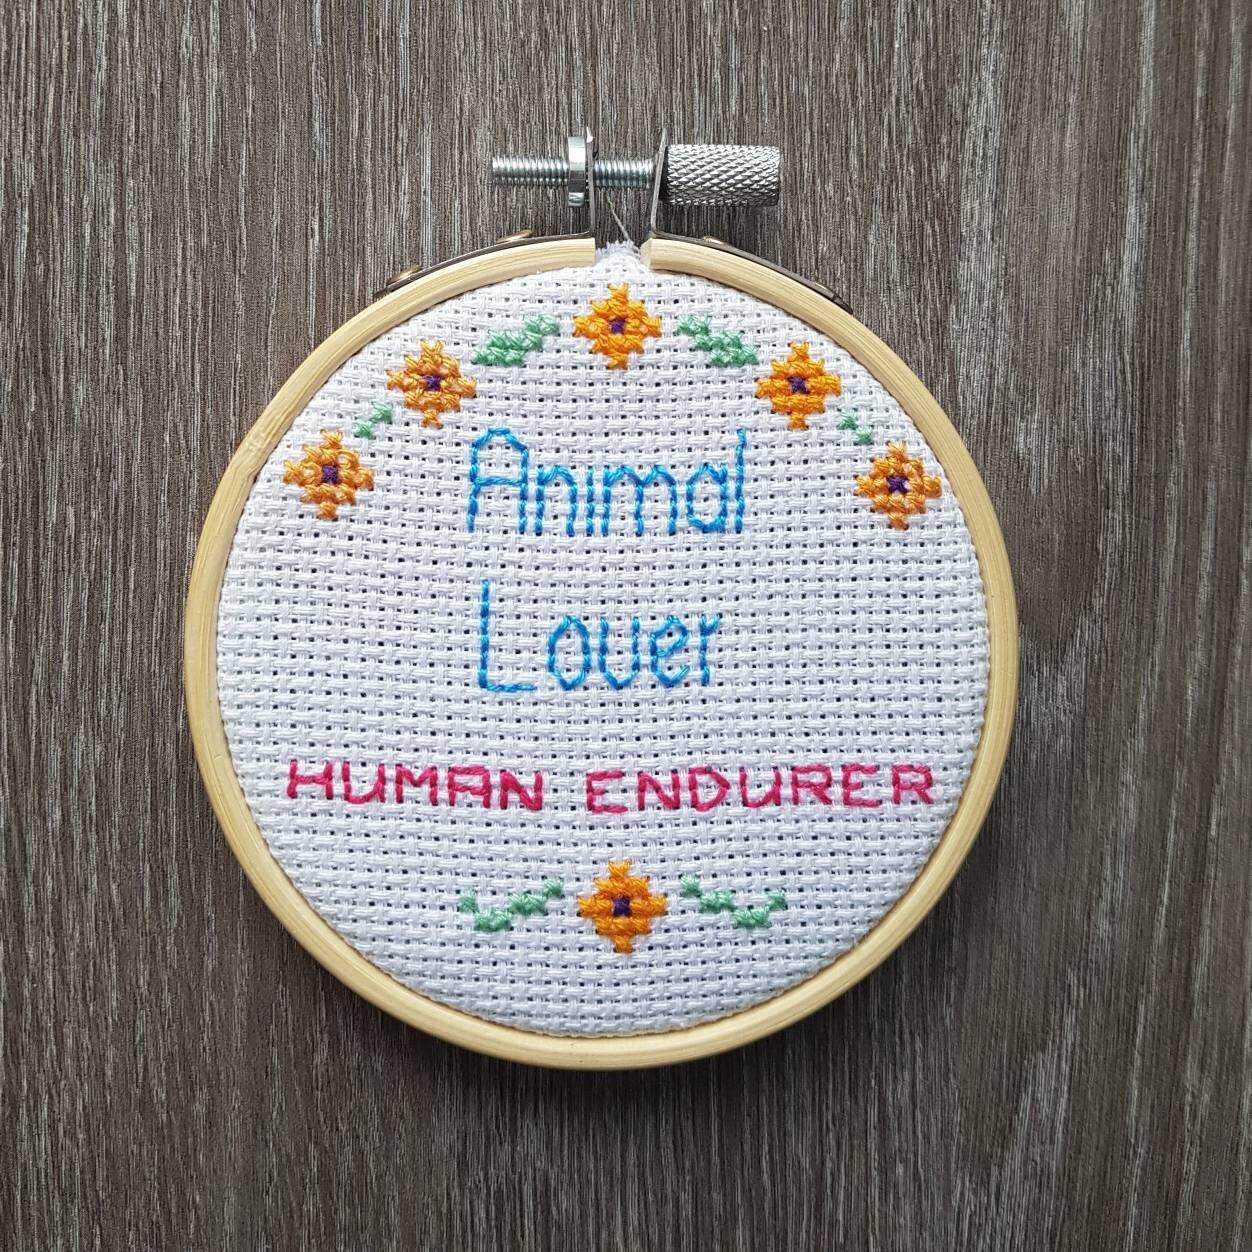 Animal lover, human endurer cross stitch quote in 3 inch embroidery hoop on dark wood background. Quote is surrounded by small flowers